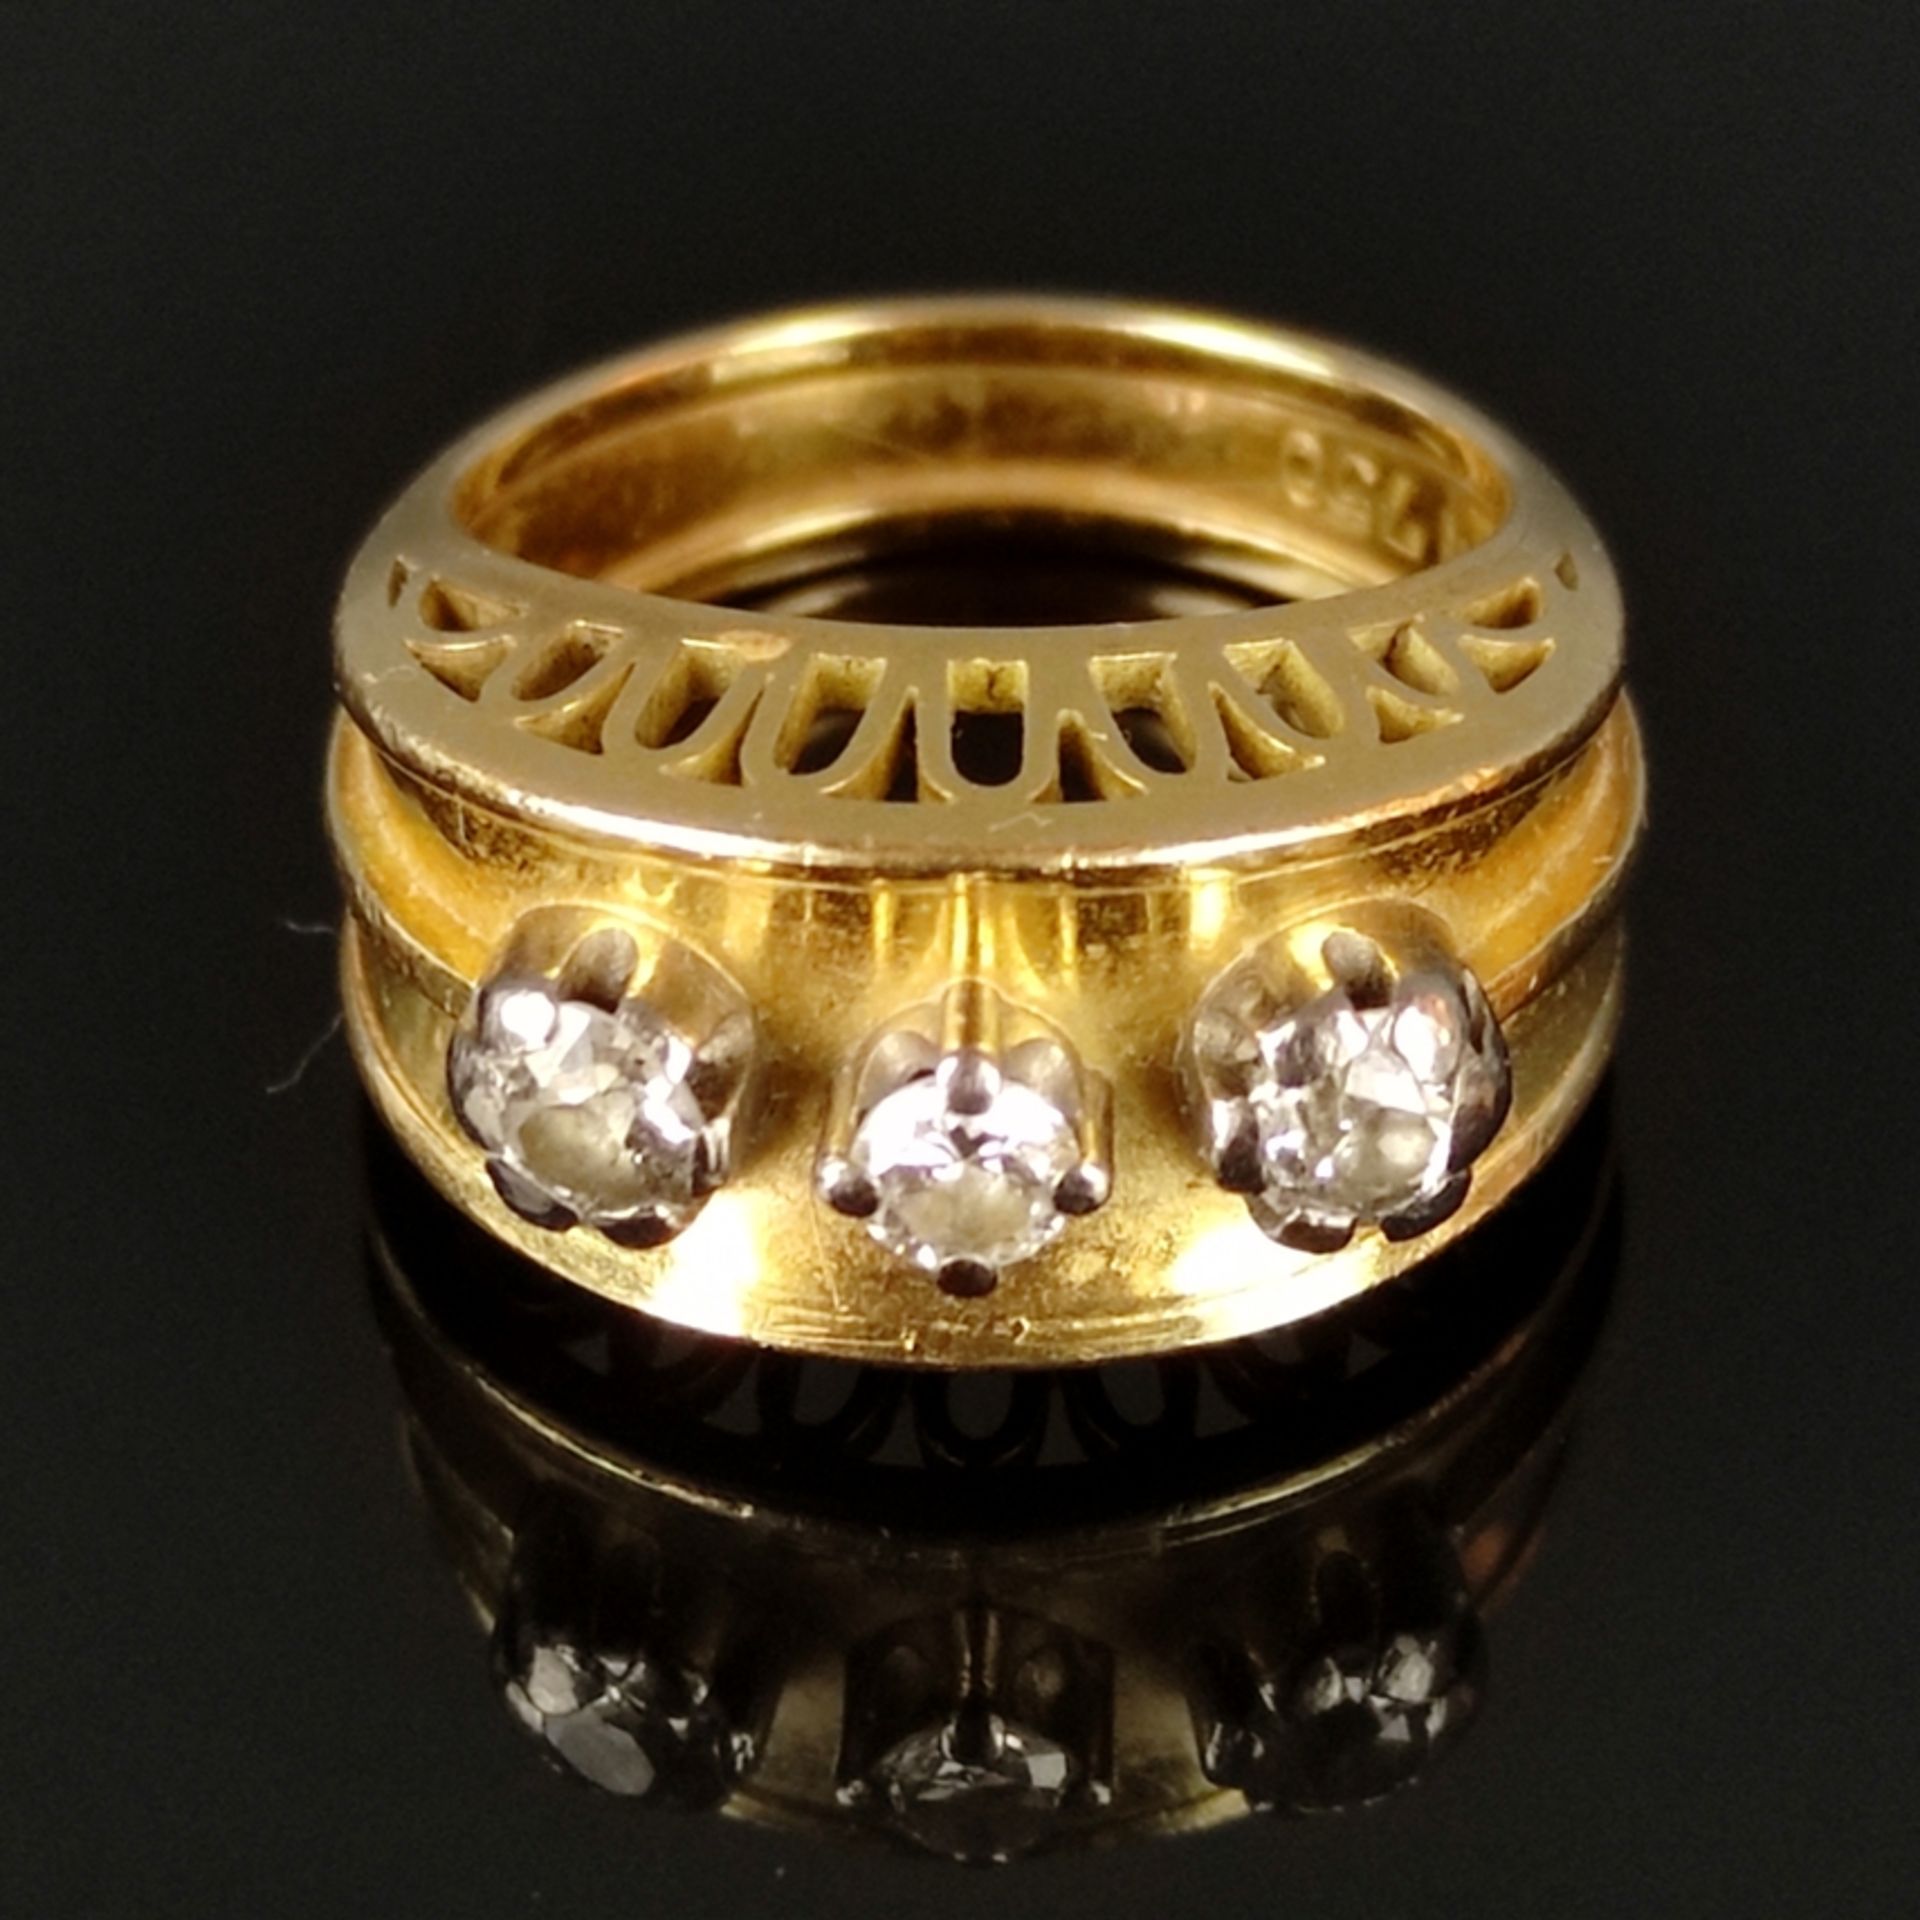 Diamond ring, 750/18K yellow gold (hallmarked), 7.1g, the wide front side worked in a deep pattern  - Image 2 of 3